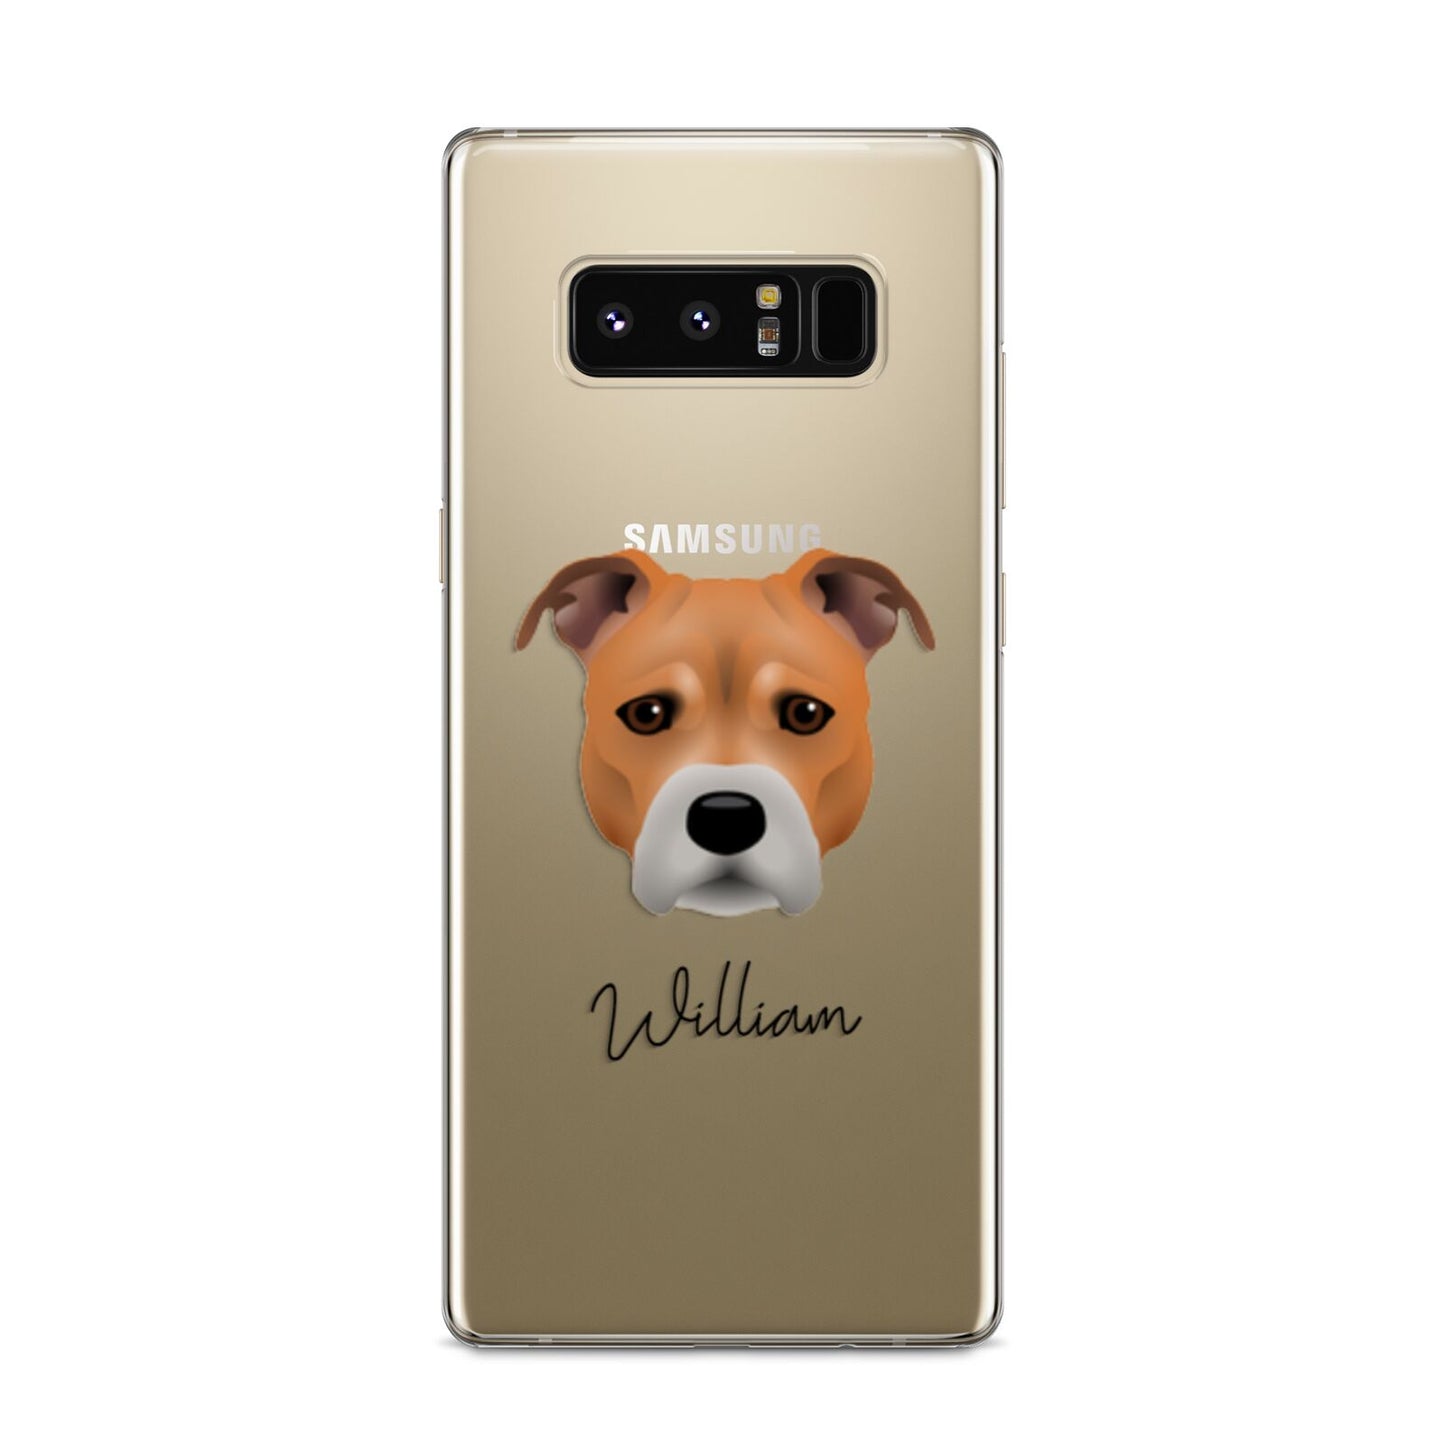 Staffordshire Bull Terrier Personalised Samsung Galaxy S8 Case